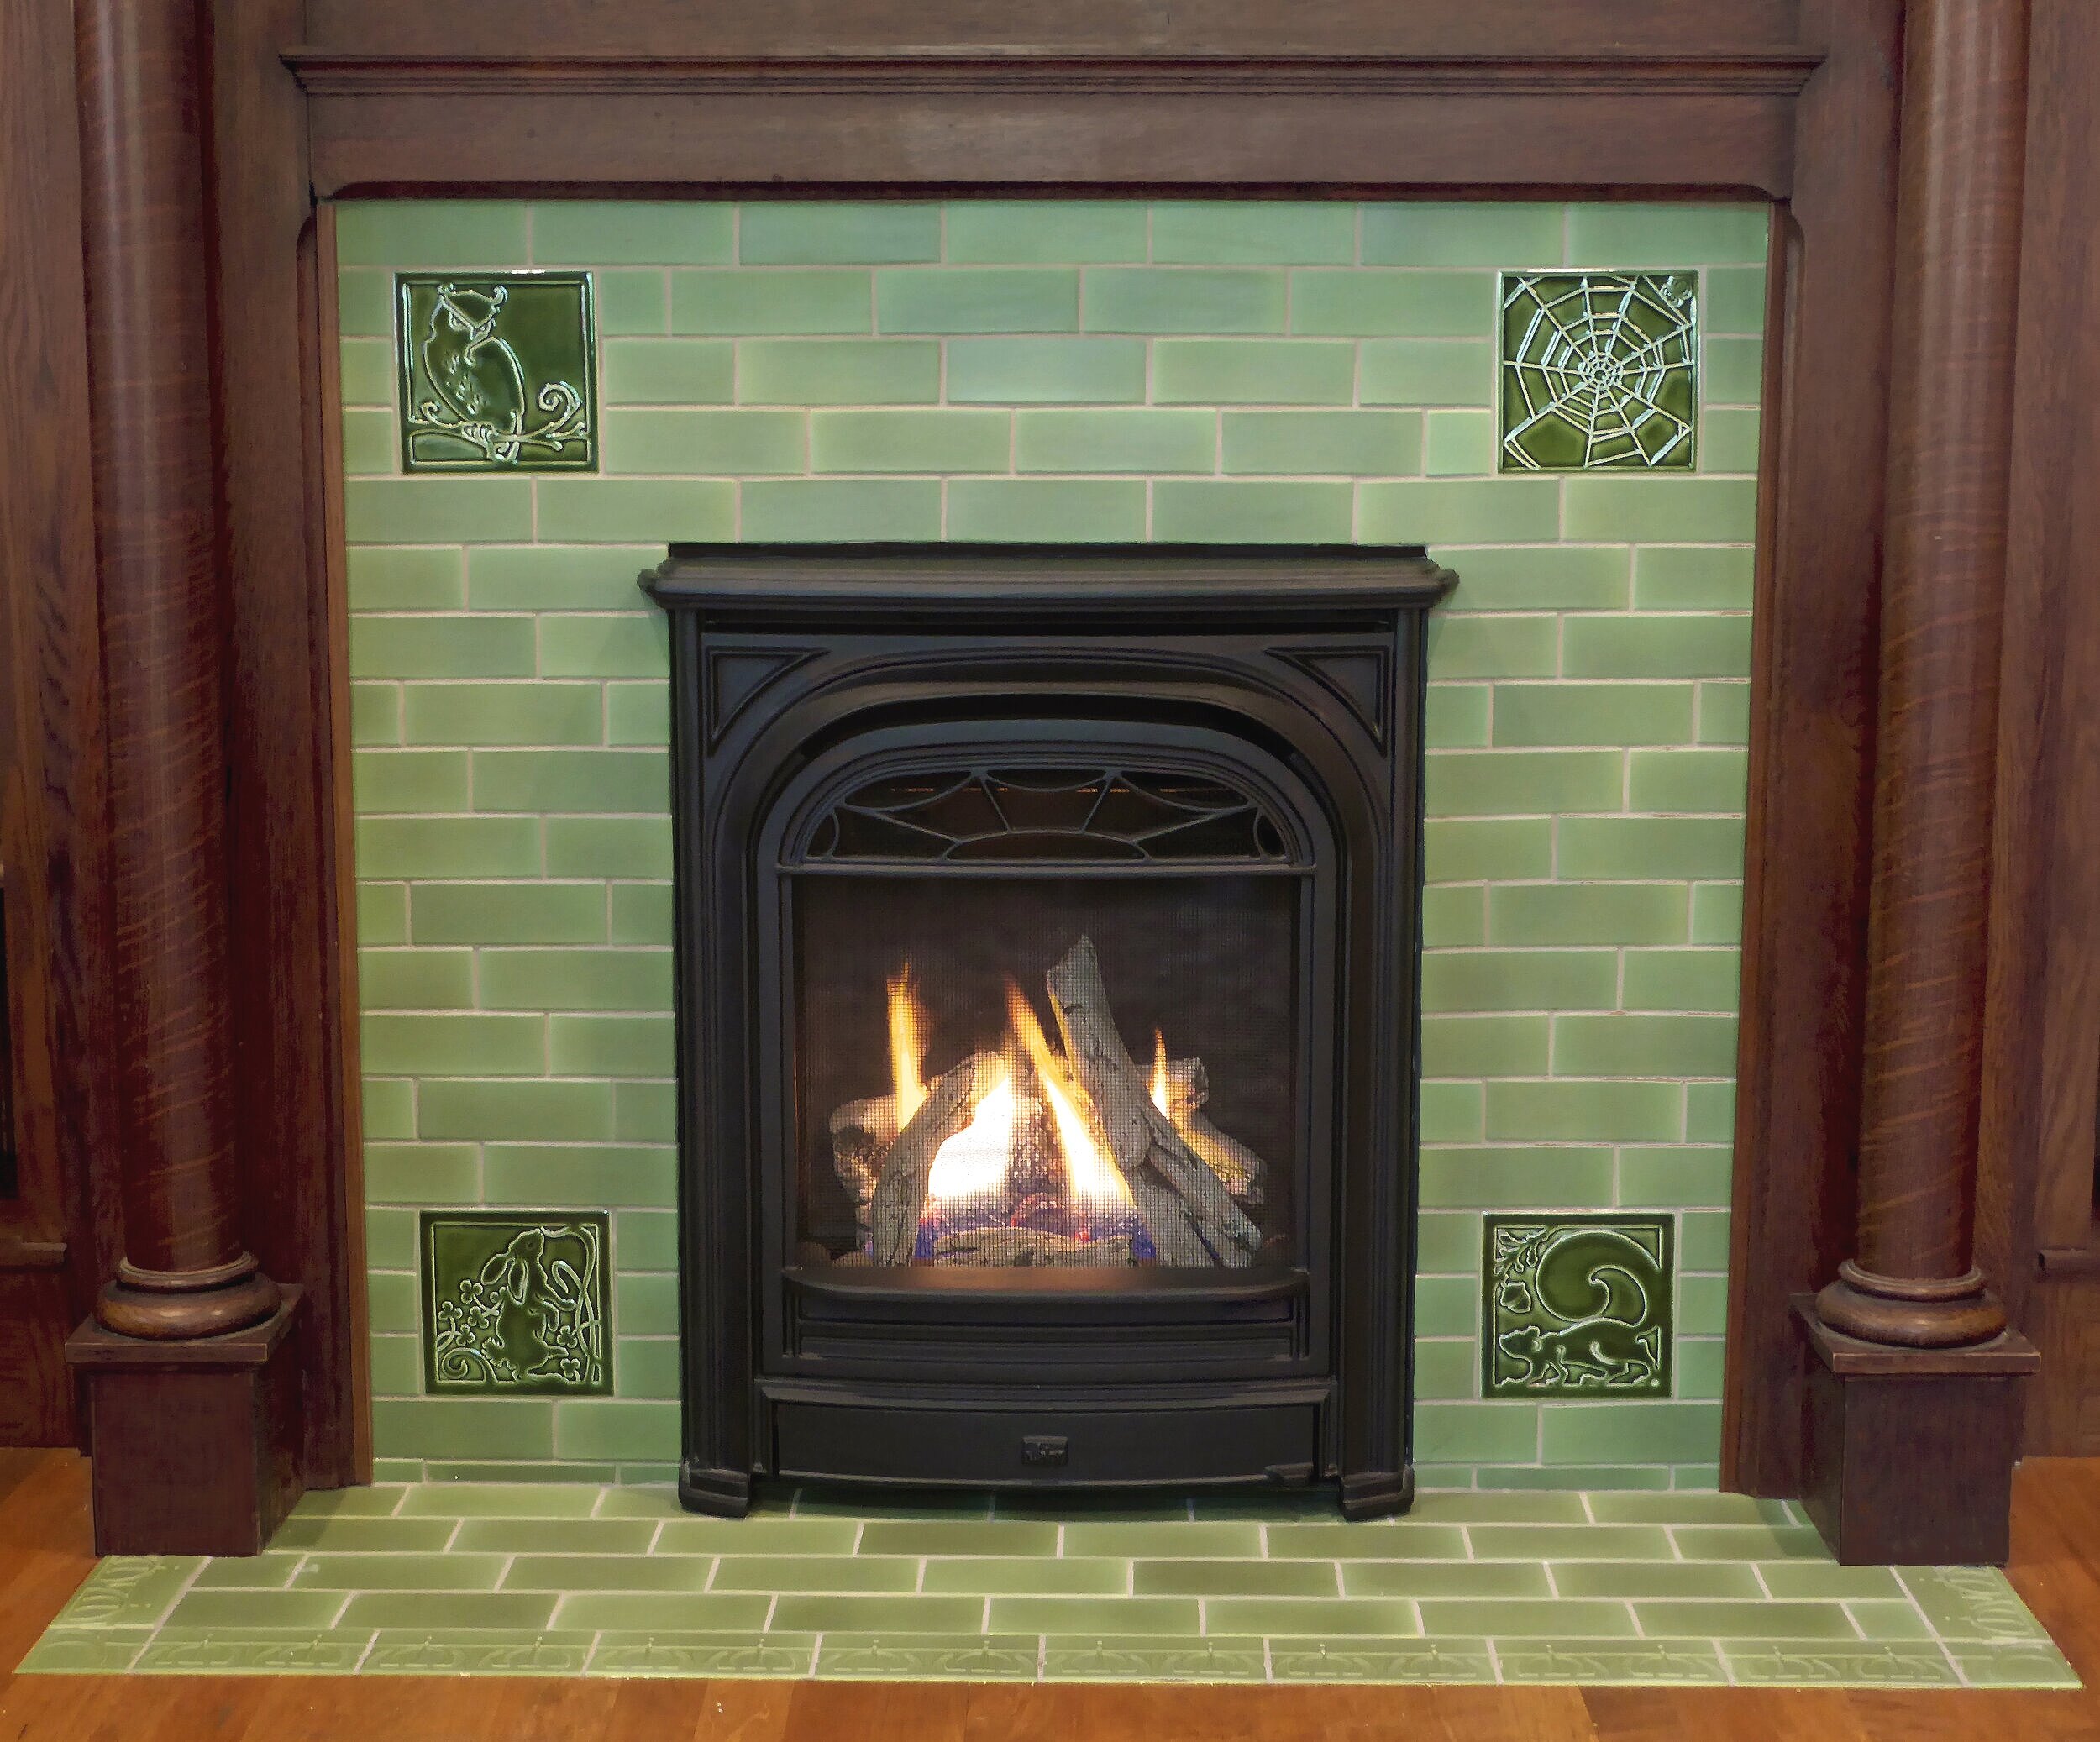 4x4 Cottage Craft Tile Arts and Crafts Green Kitchen Fireplace Wall Tile  18pcs